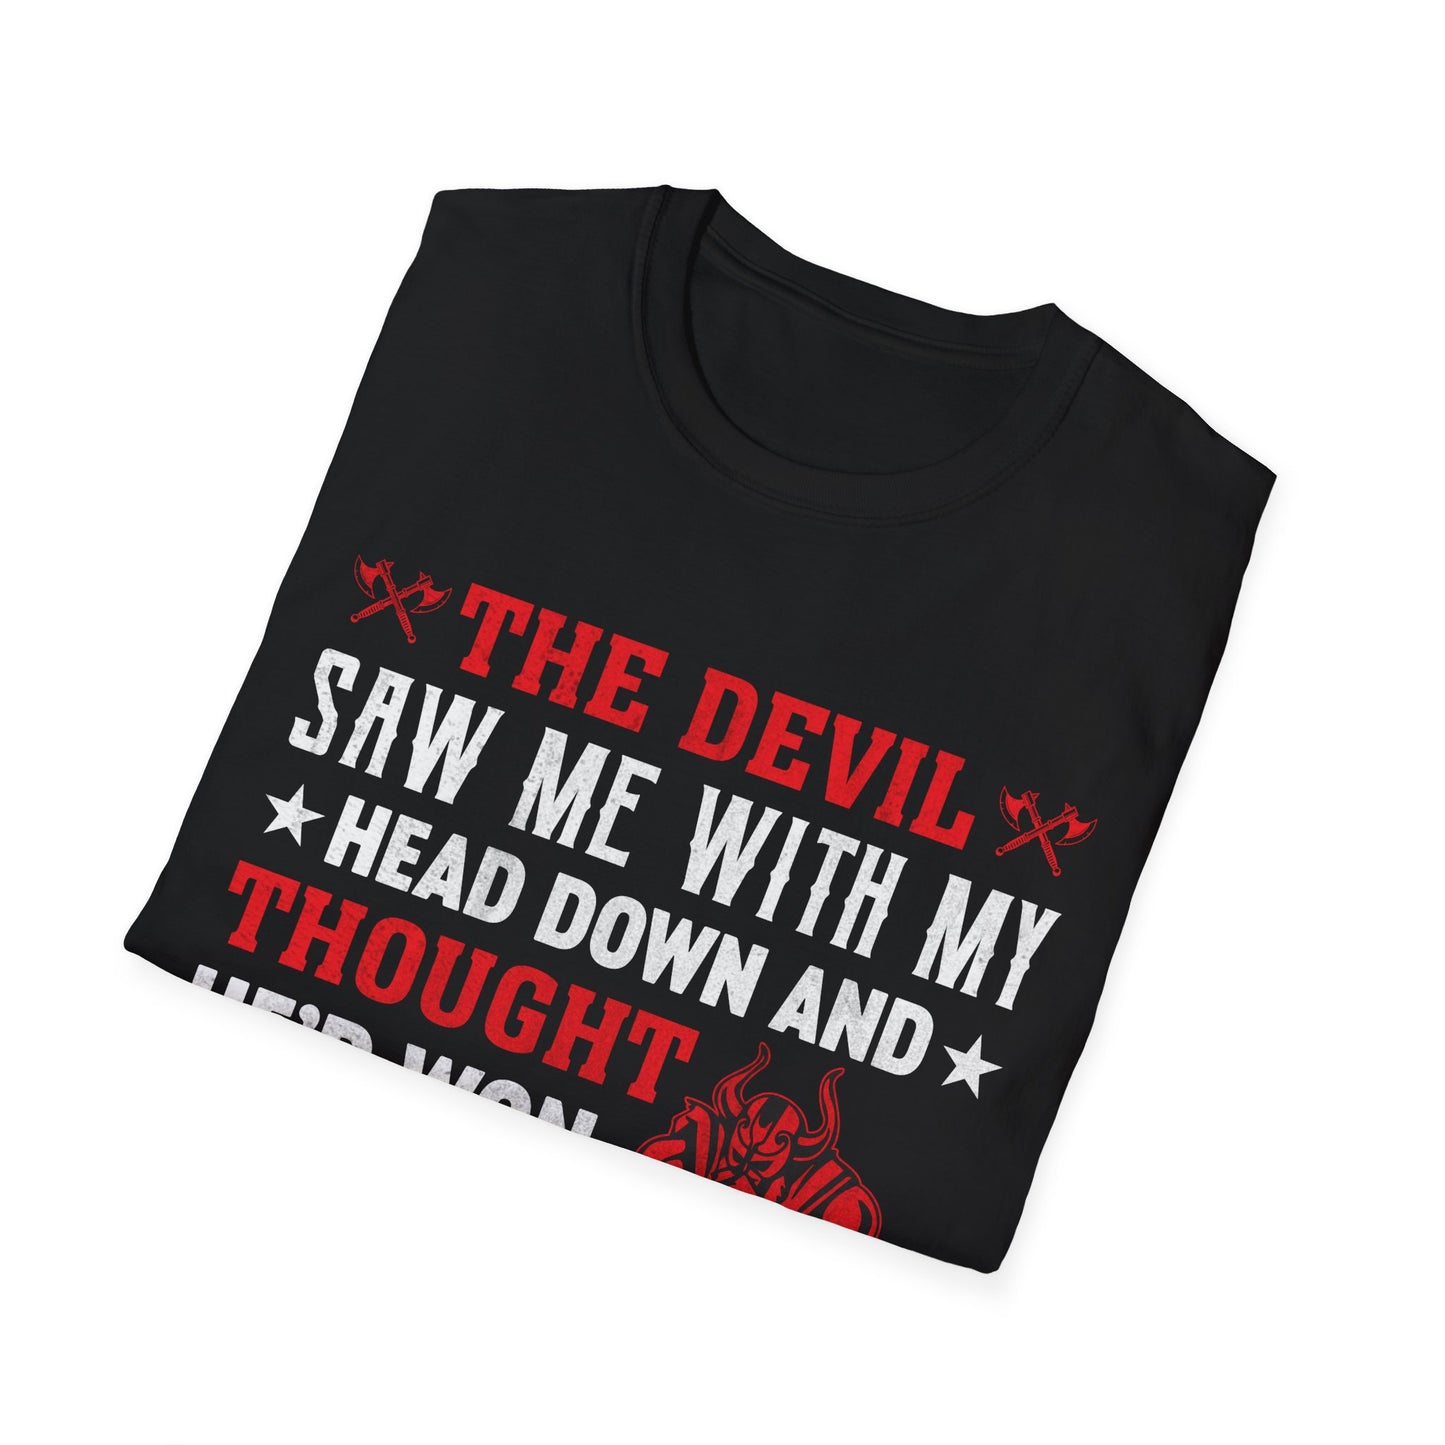 The Devil Saw Me With My Head Down And Thought He'd Won Until I Said Odin Viking T-Shirt